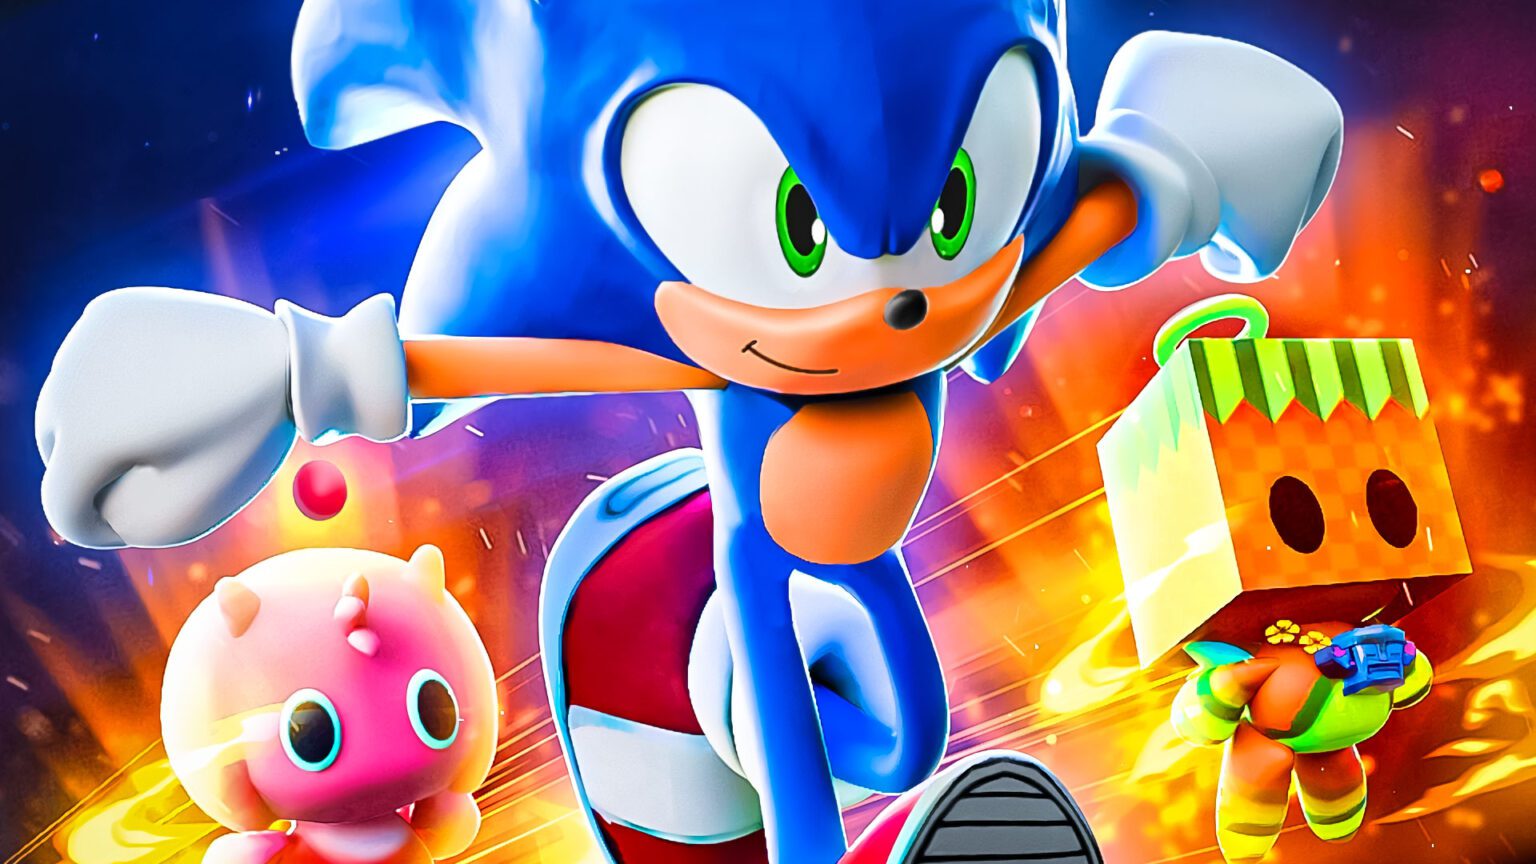 Roblo new update Sonic Speed Simulator called Enchant!